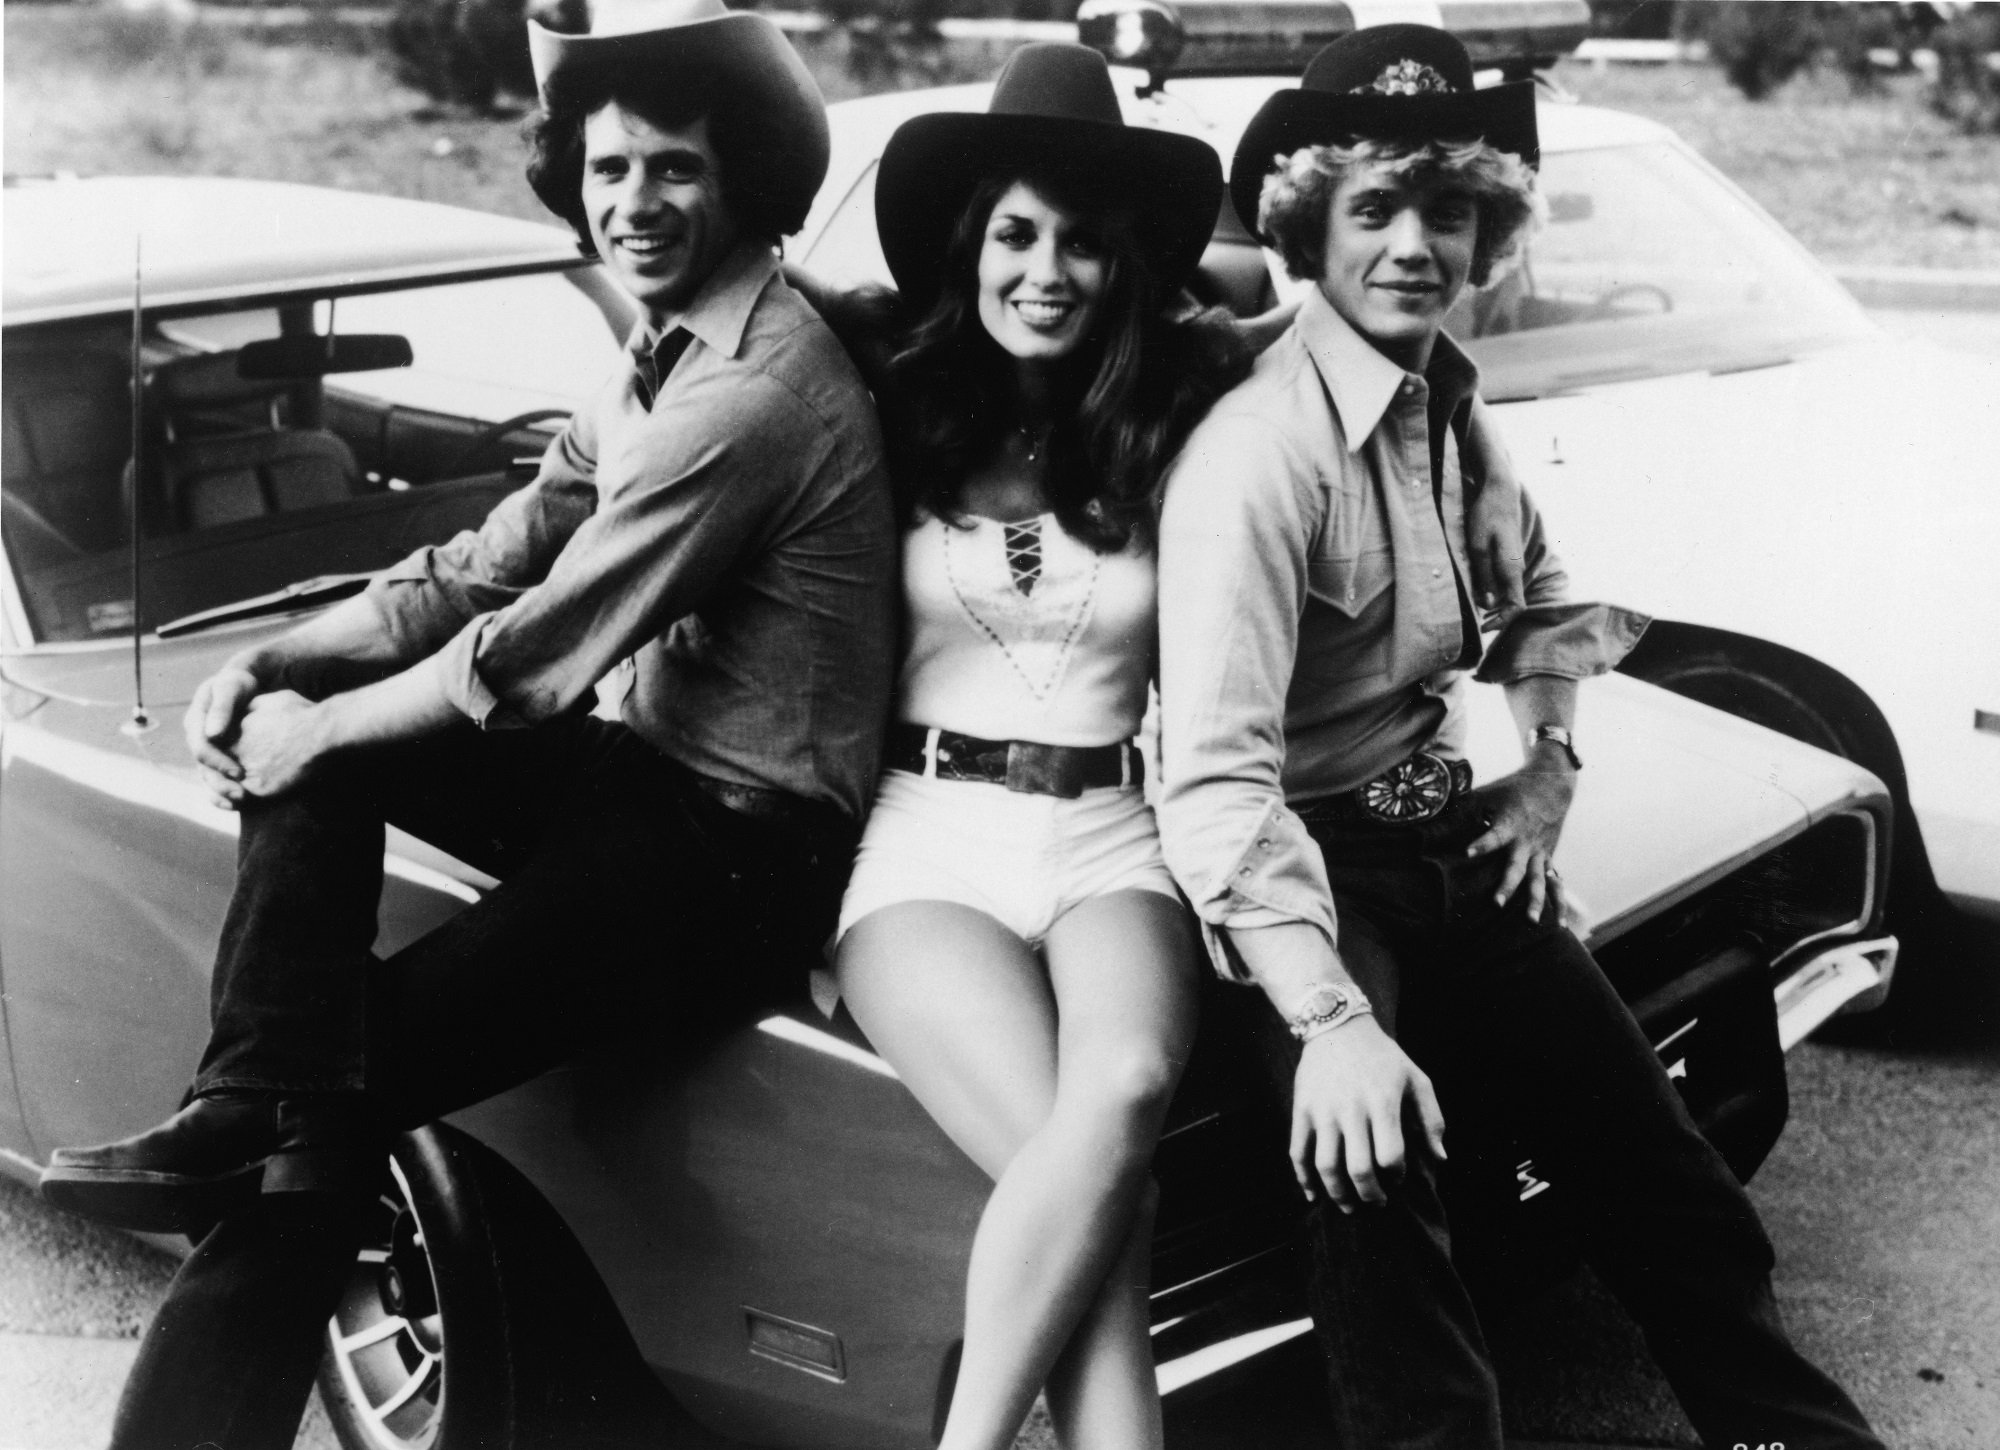 Tom Wopat, Catherine Bach, and John Schneider pose on The Dukes of Hazzard car, the General Lee